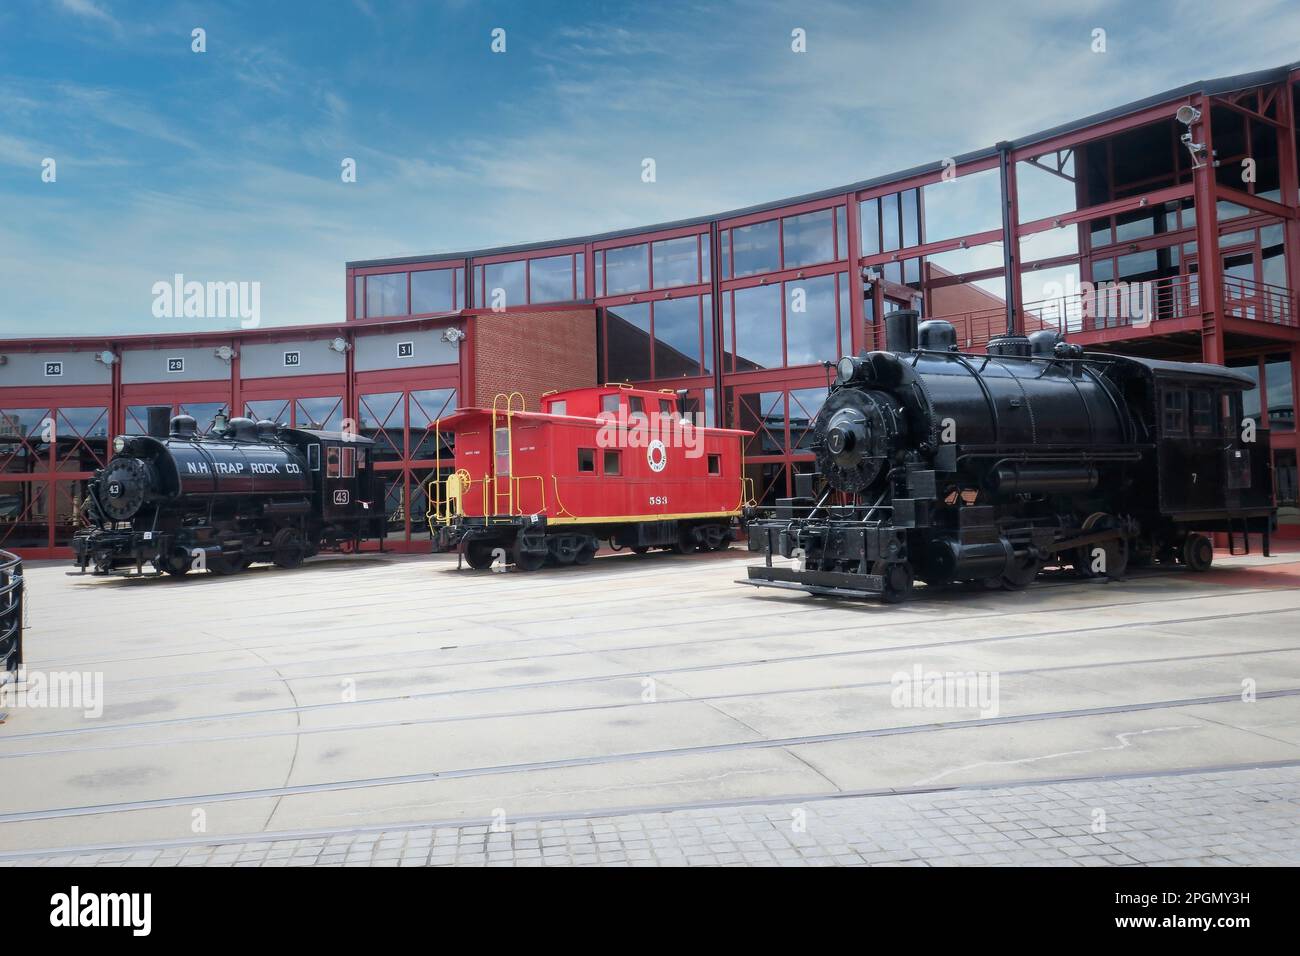 Restored steam locomotives and a red caboose seen at the Steamtown national historic park in Scranton Pennsylvania Stock Photo